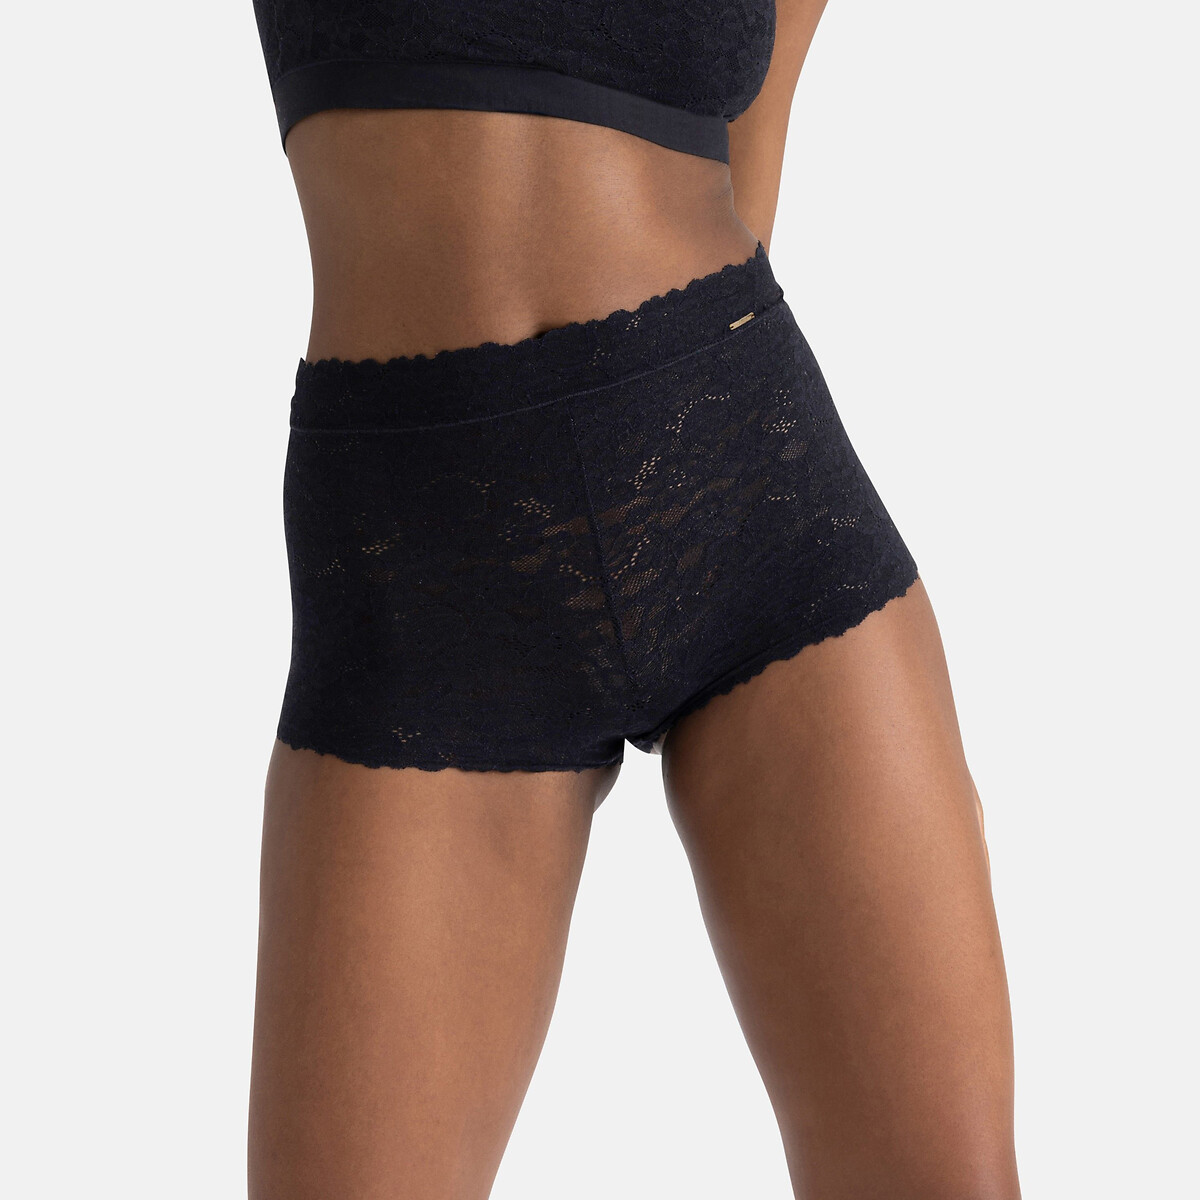 Unifit Lace Shorts, One Size Fits All